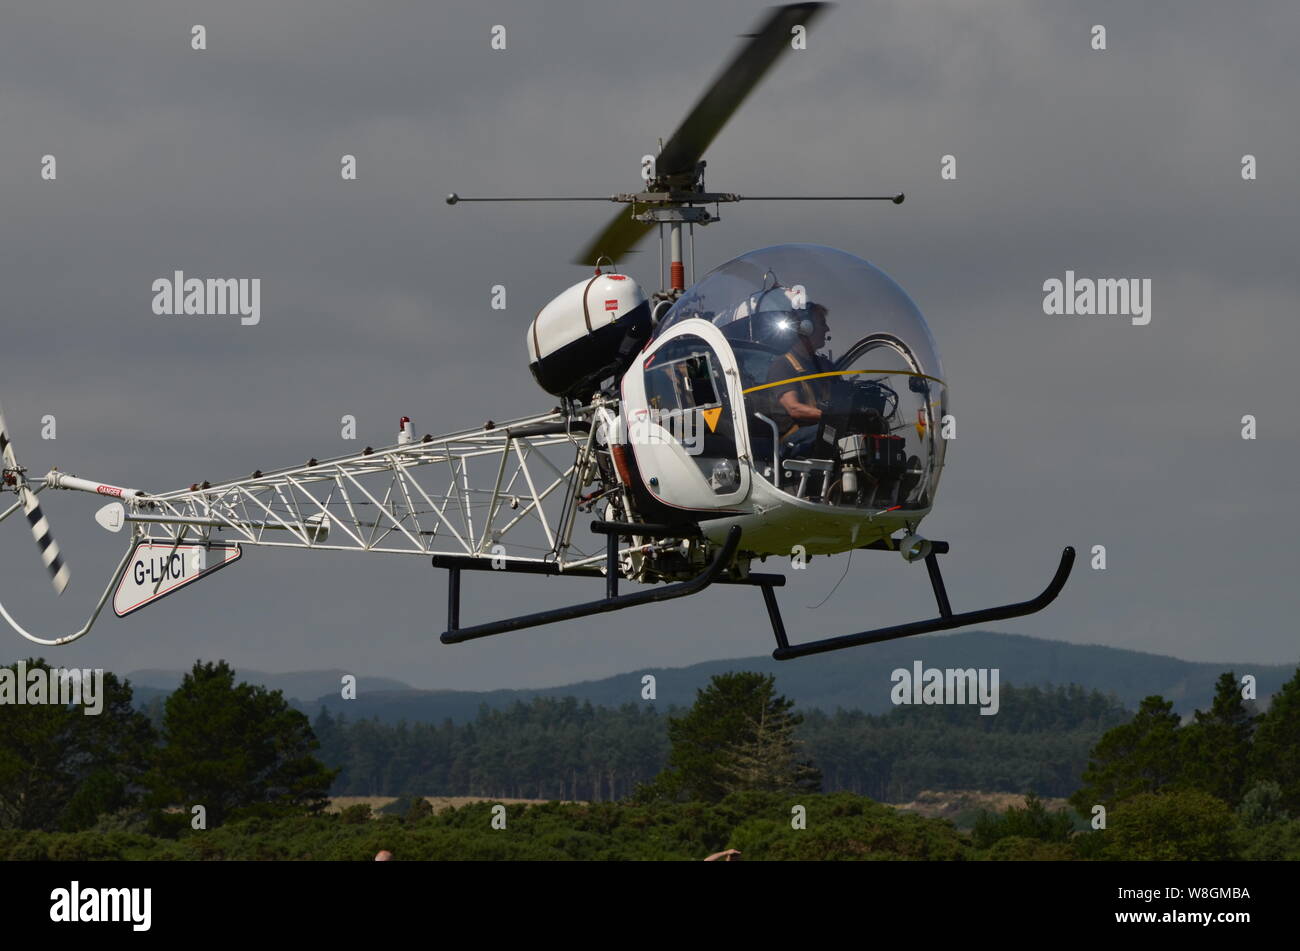 A 1961 Bell 47G-5 helicopter arriving at the Light Aircraft Association's 2019 annual fly-in event at Dornoch Airstrip, Scottish Highlands, UK. Stock Photo